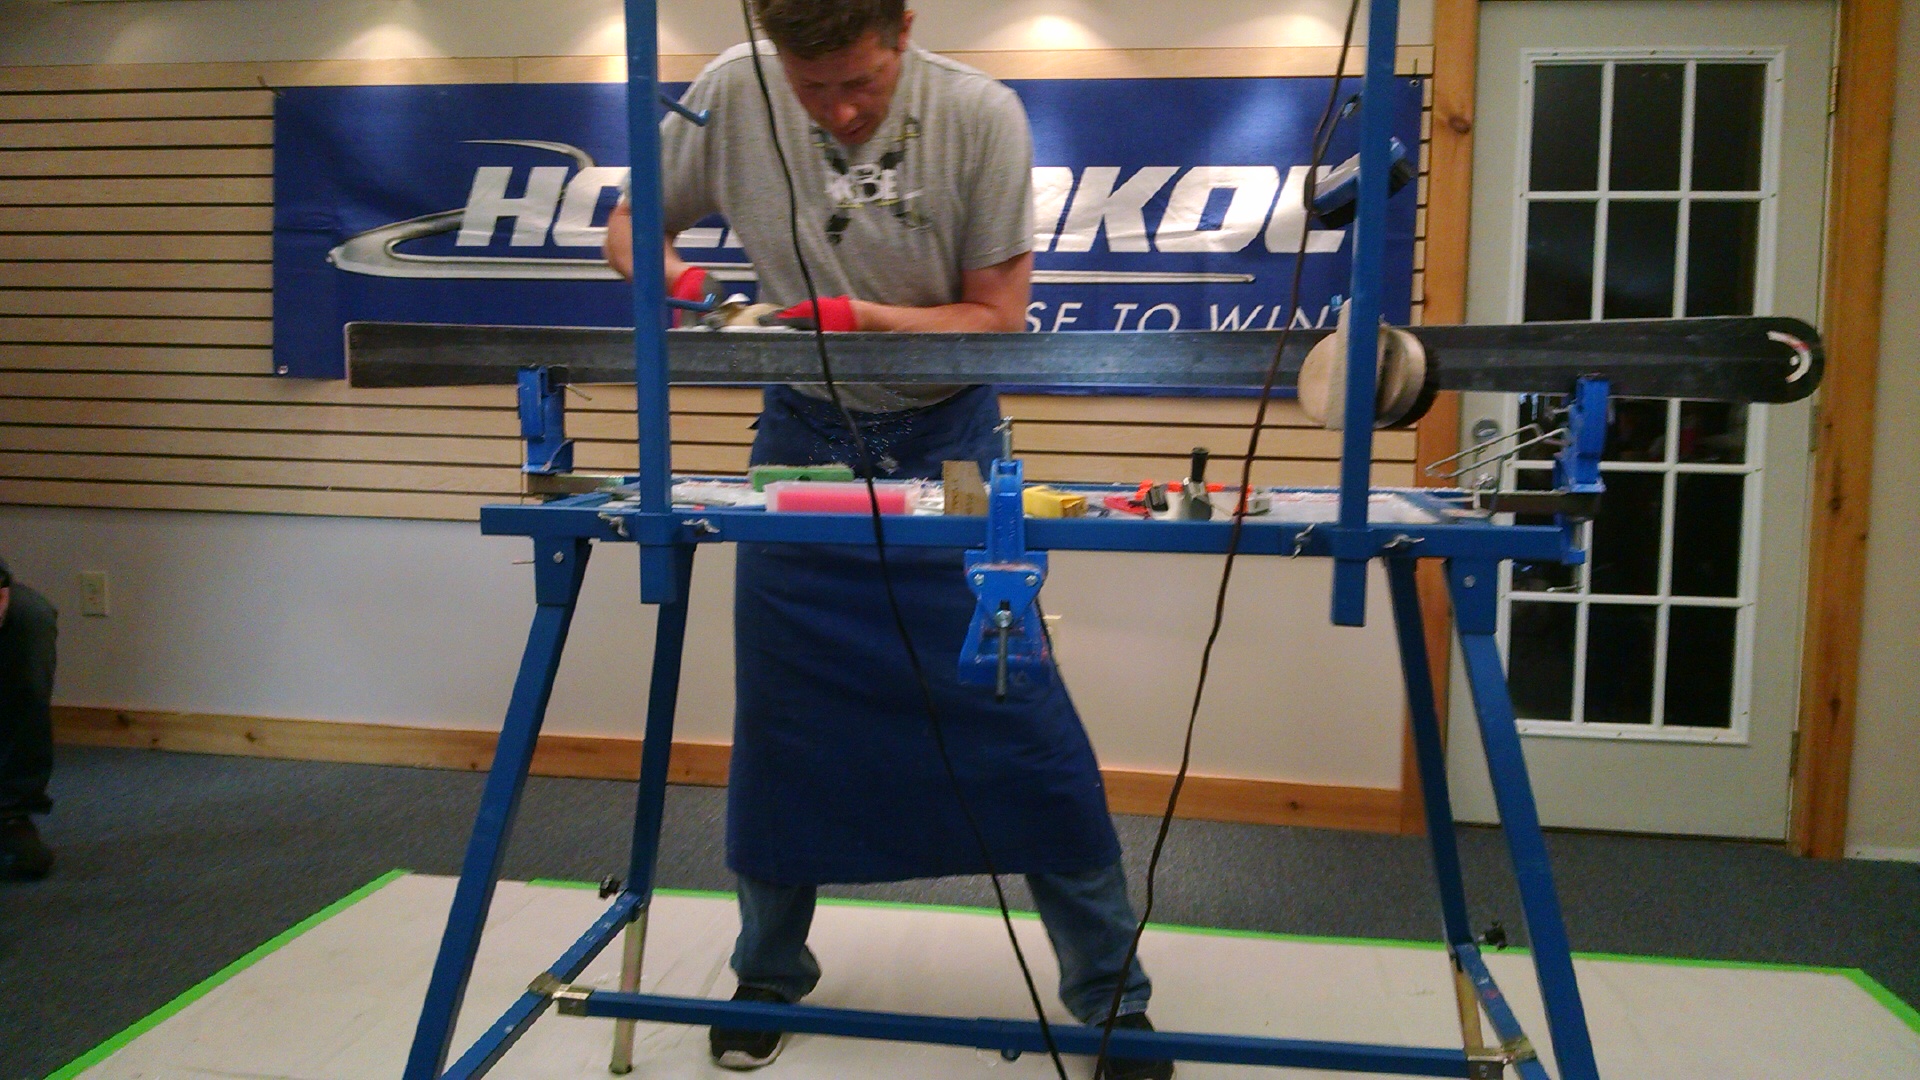 Alex Martin hand tuning skis at the Head Skis clinic April 2015.